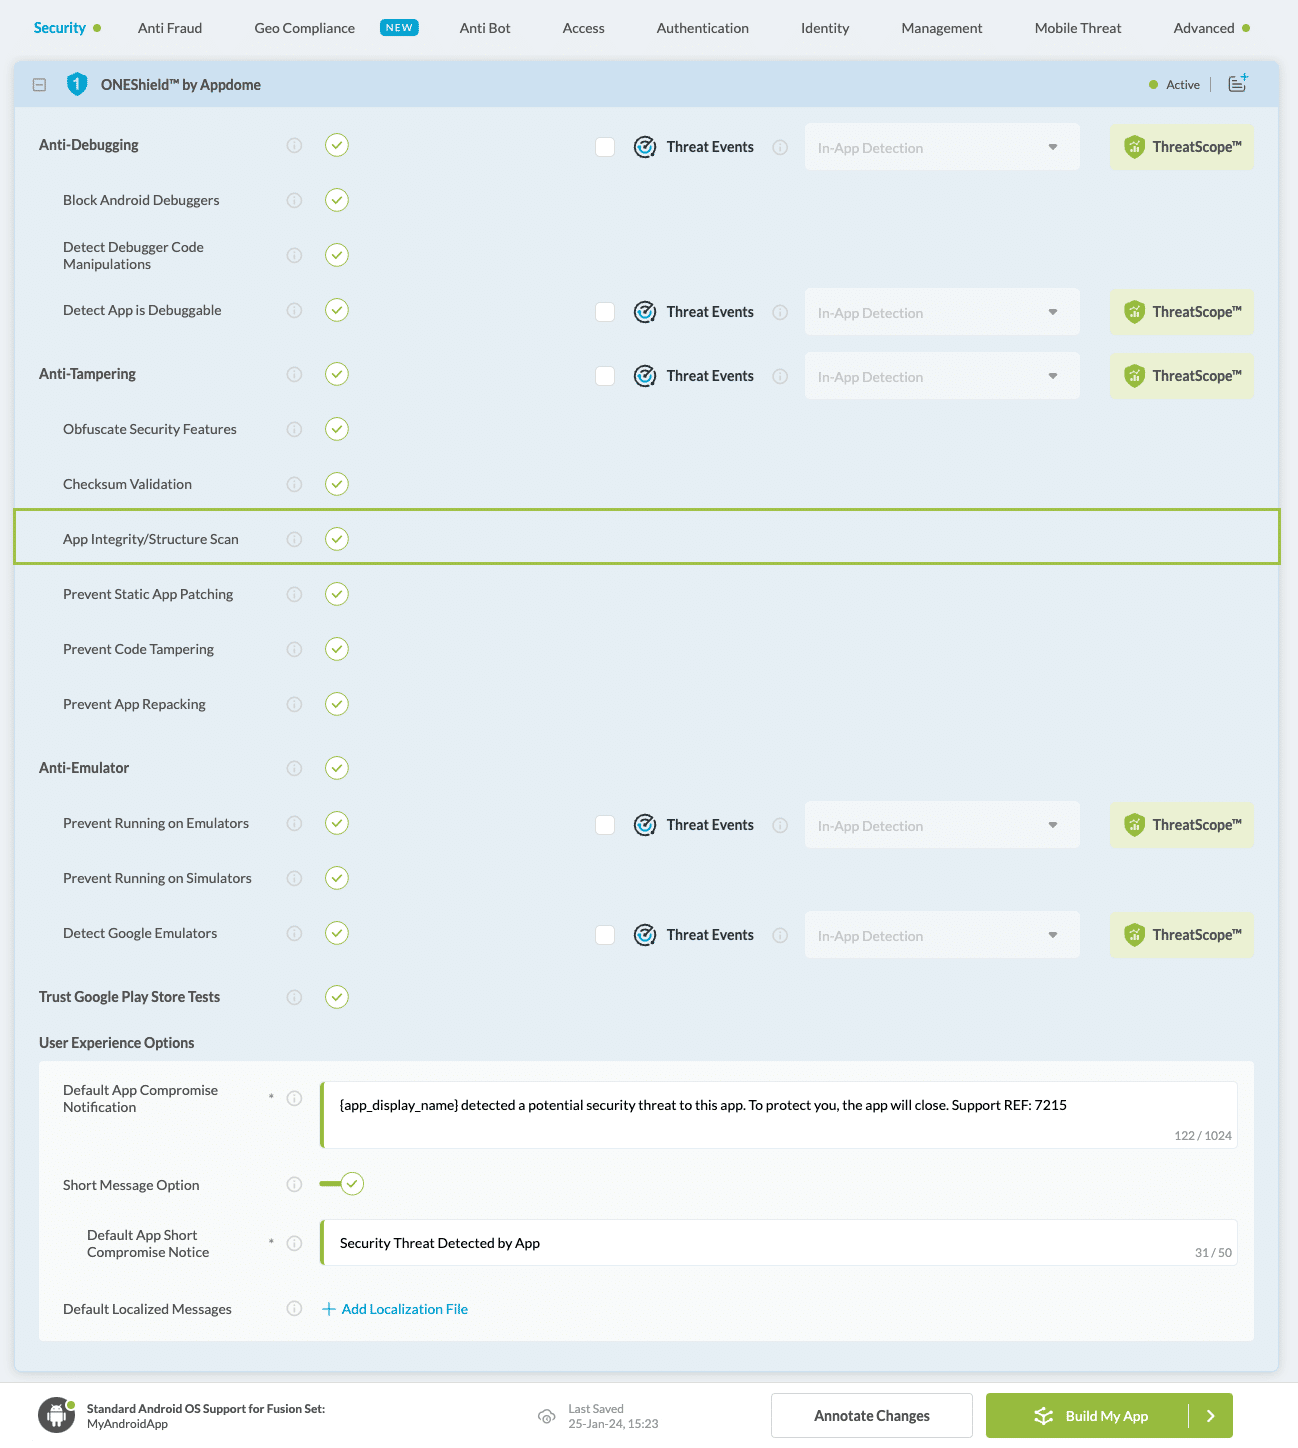 App Integrity/Structure Scan option